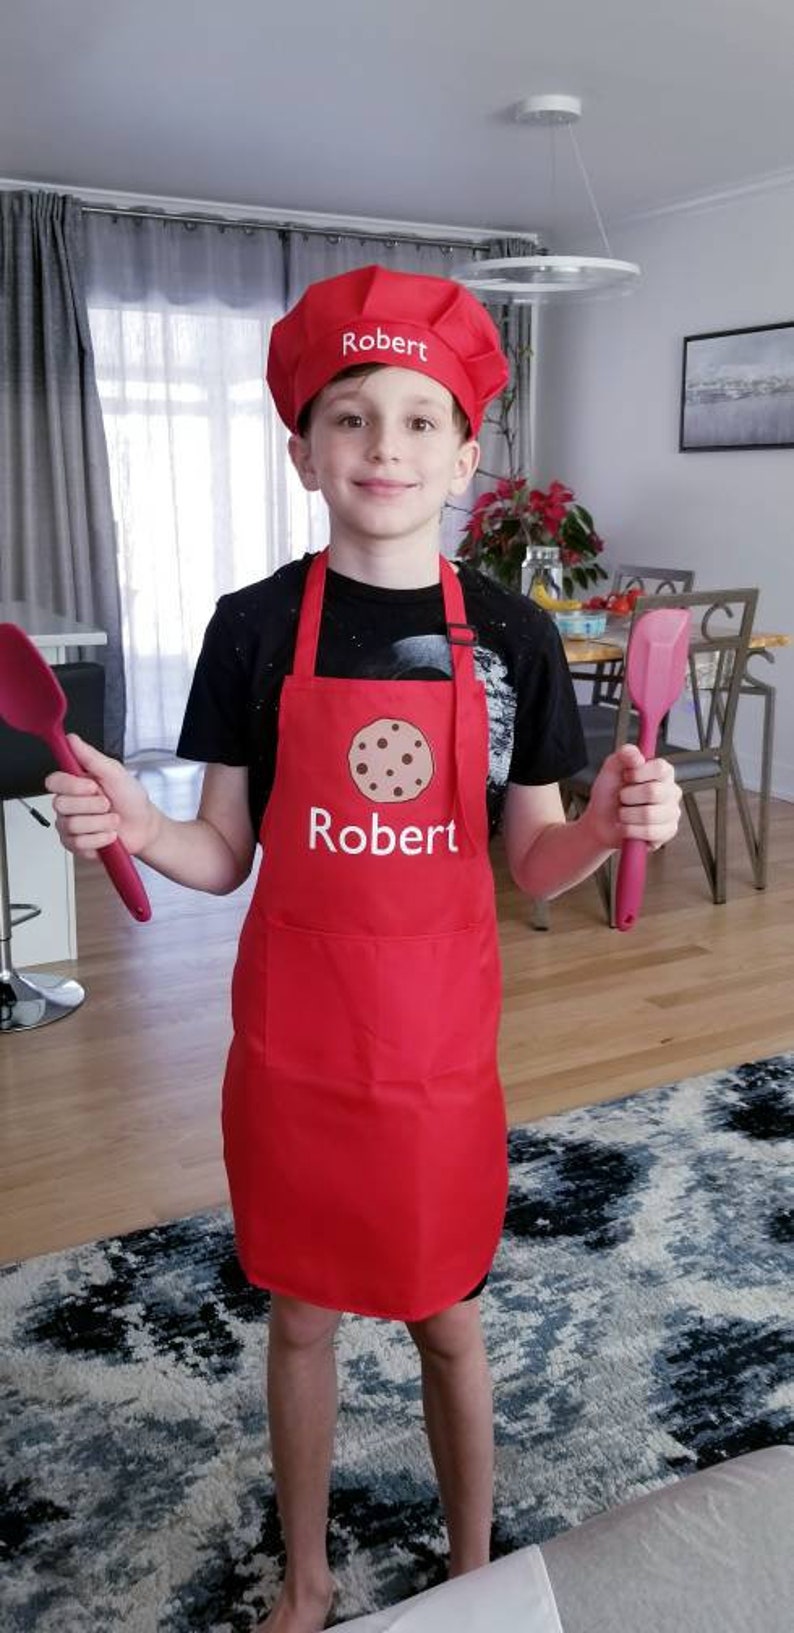 Personalized Apron and Chef Hat for Children, Kids Personalized Gift image 2